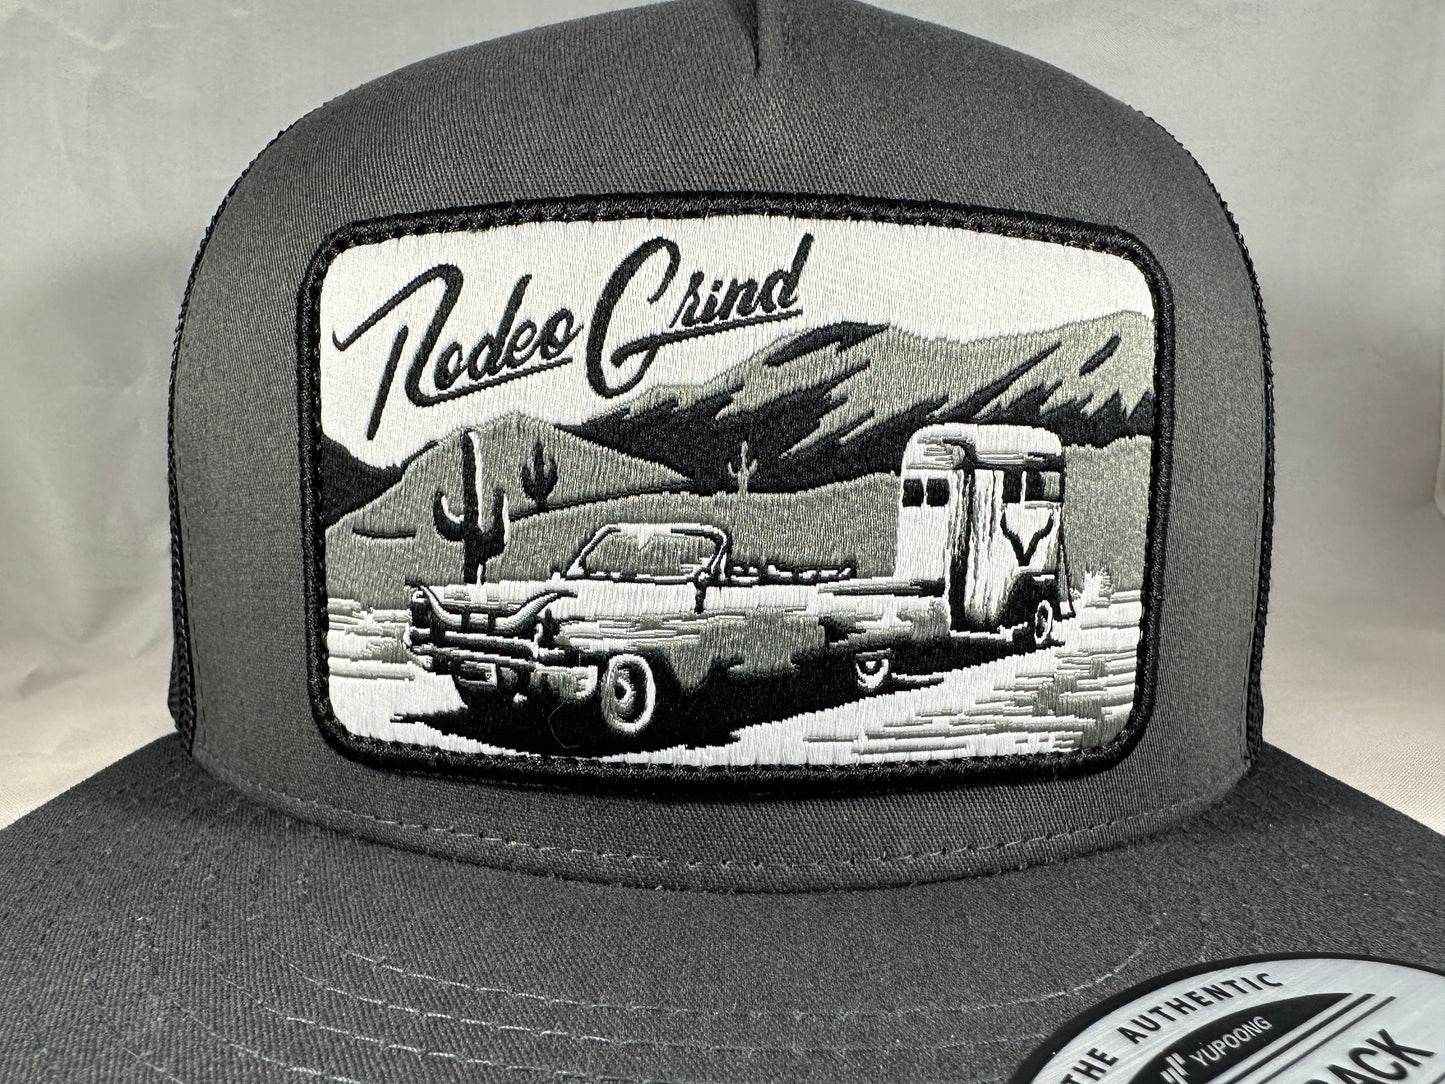 Rodeo Grind - Cadillac - Charcoal/Black Mesh